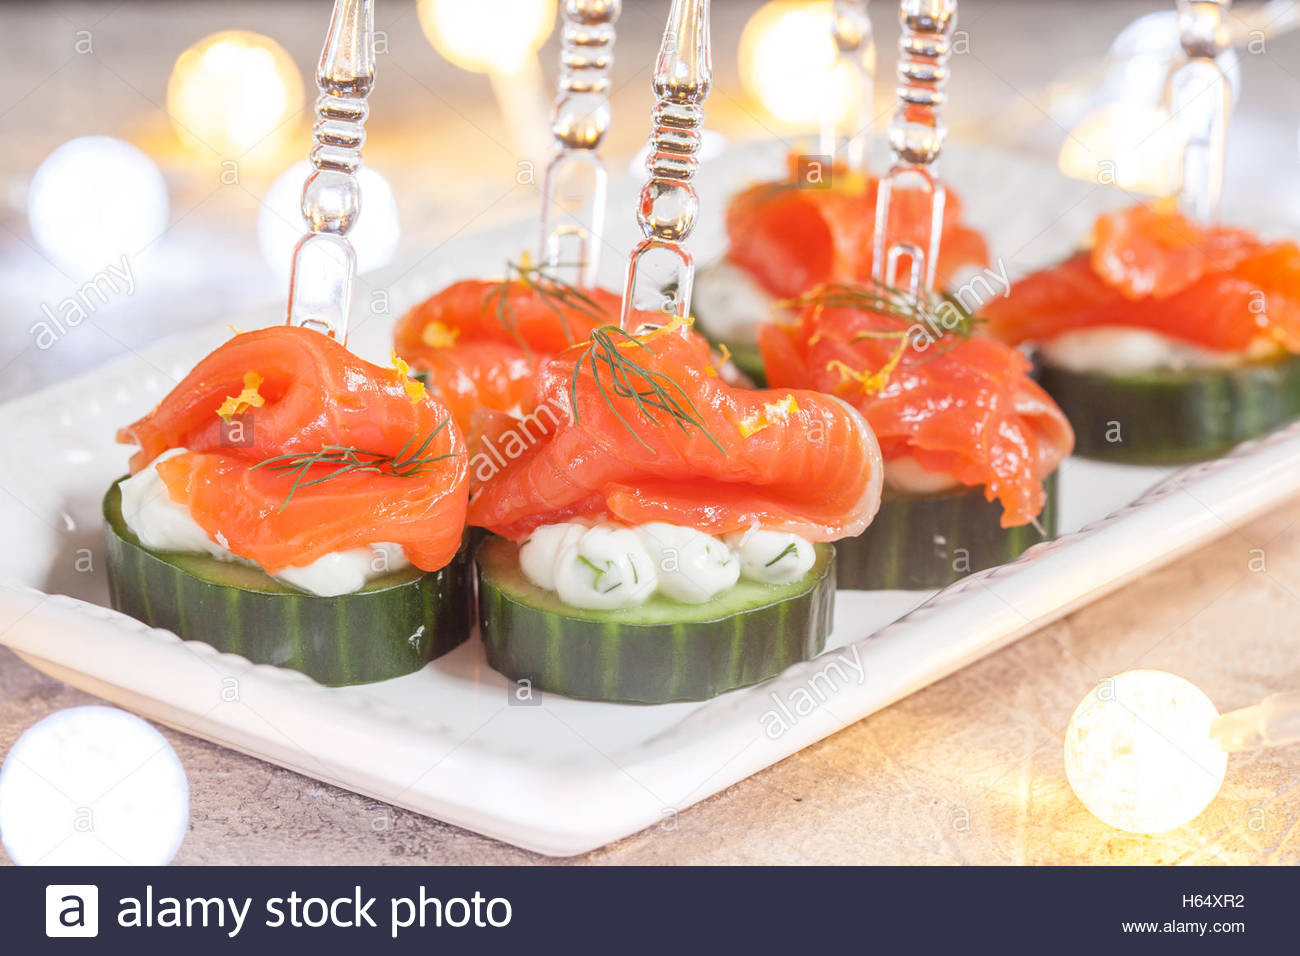 Cucumber Appetizers With Dill And Cream Cheese
 cucumber with dill cream cheese and smoked salmon